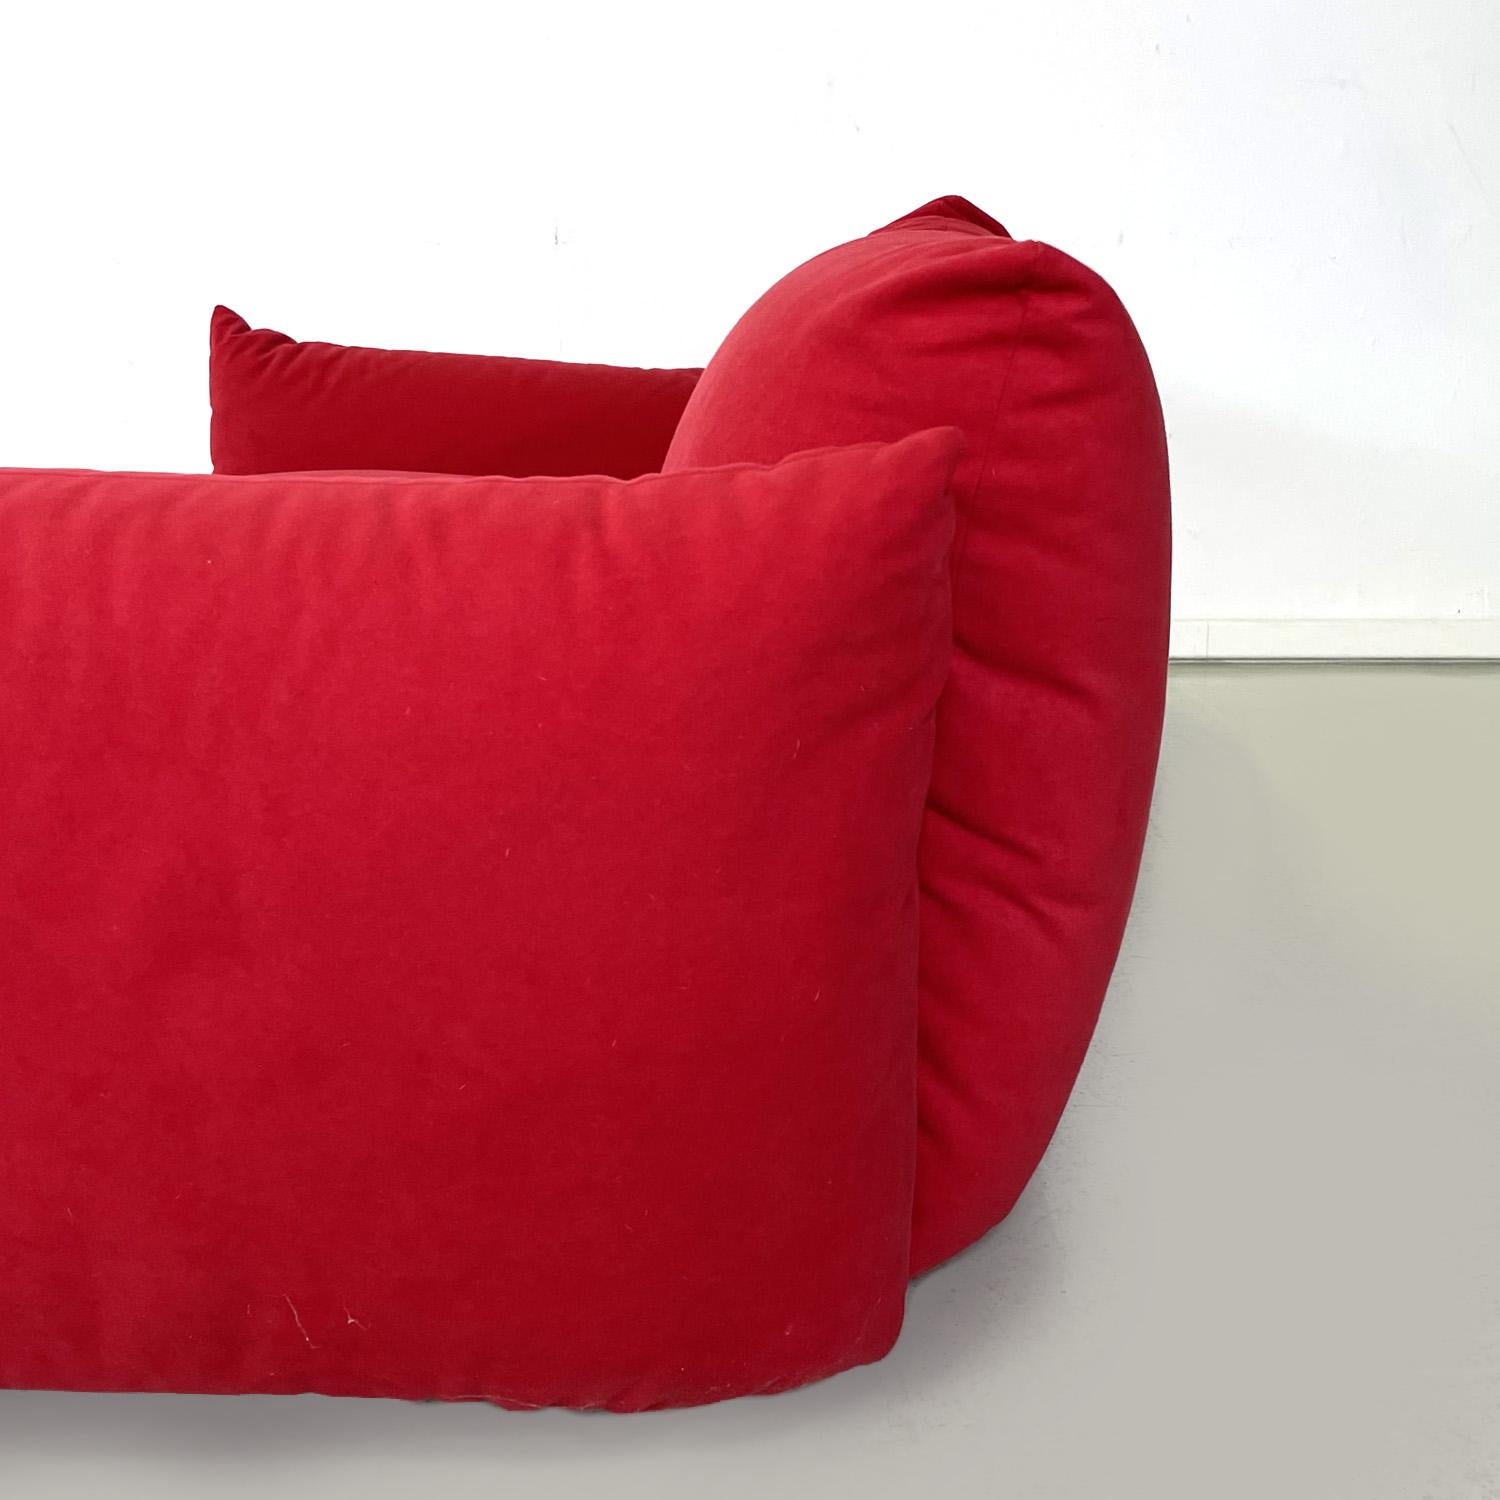 Italian modern red living room Marenco by Mario Marenco for Arflex, 1970s For Sale 2